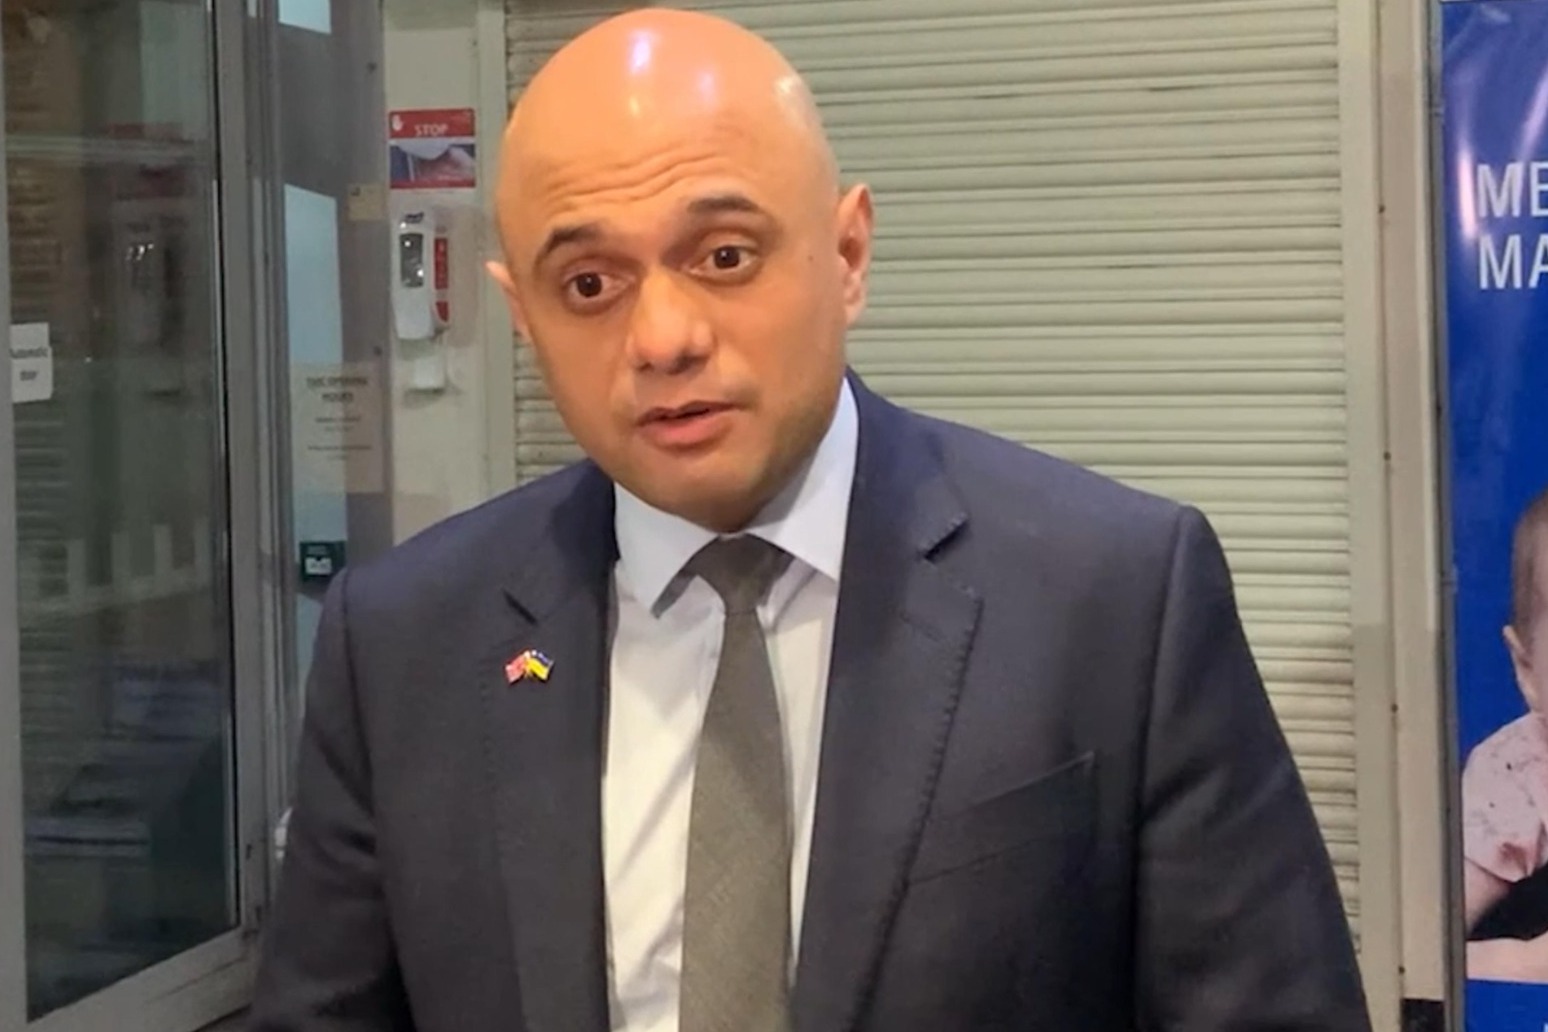 Rollout of fourth dose of Covid-19 vaccine being ‘kept under review’, Javid says 